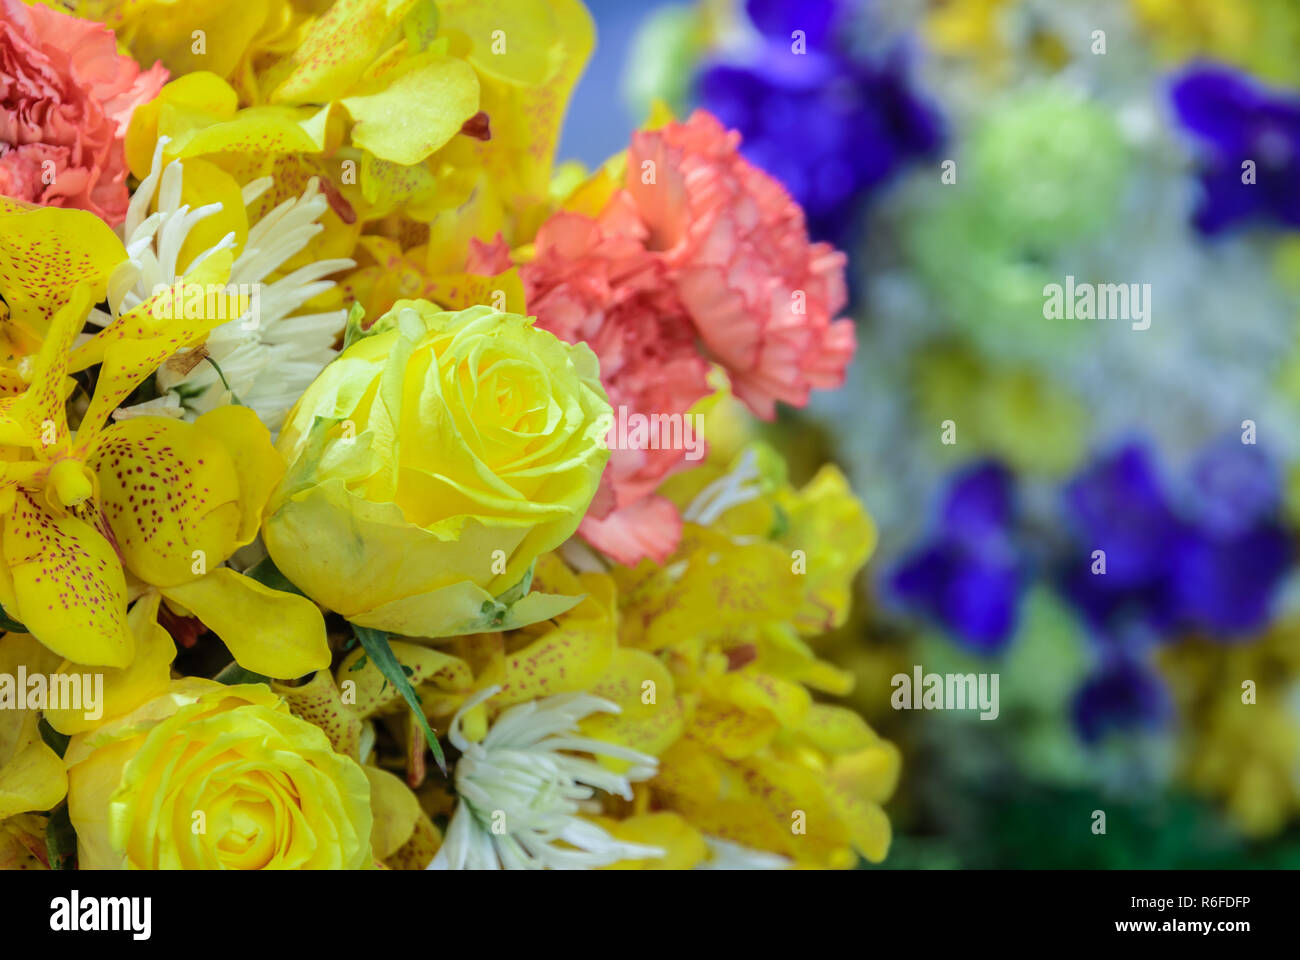 Beautiful bouquet flowers with different types of yellow flowers Stock Photo